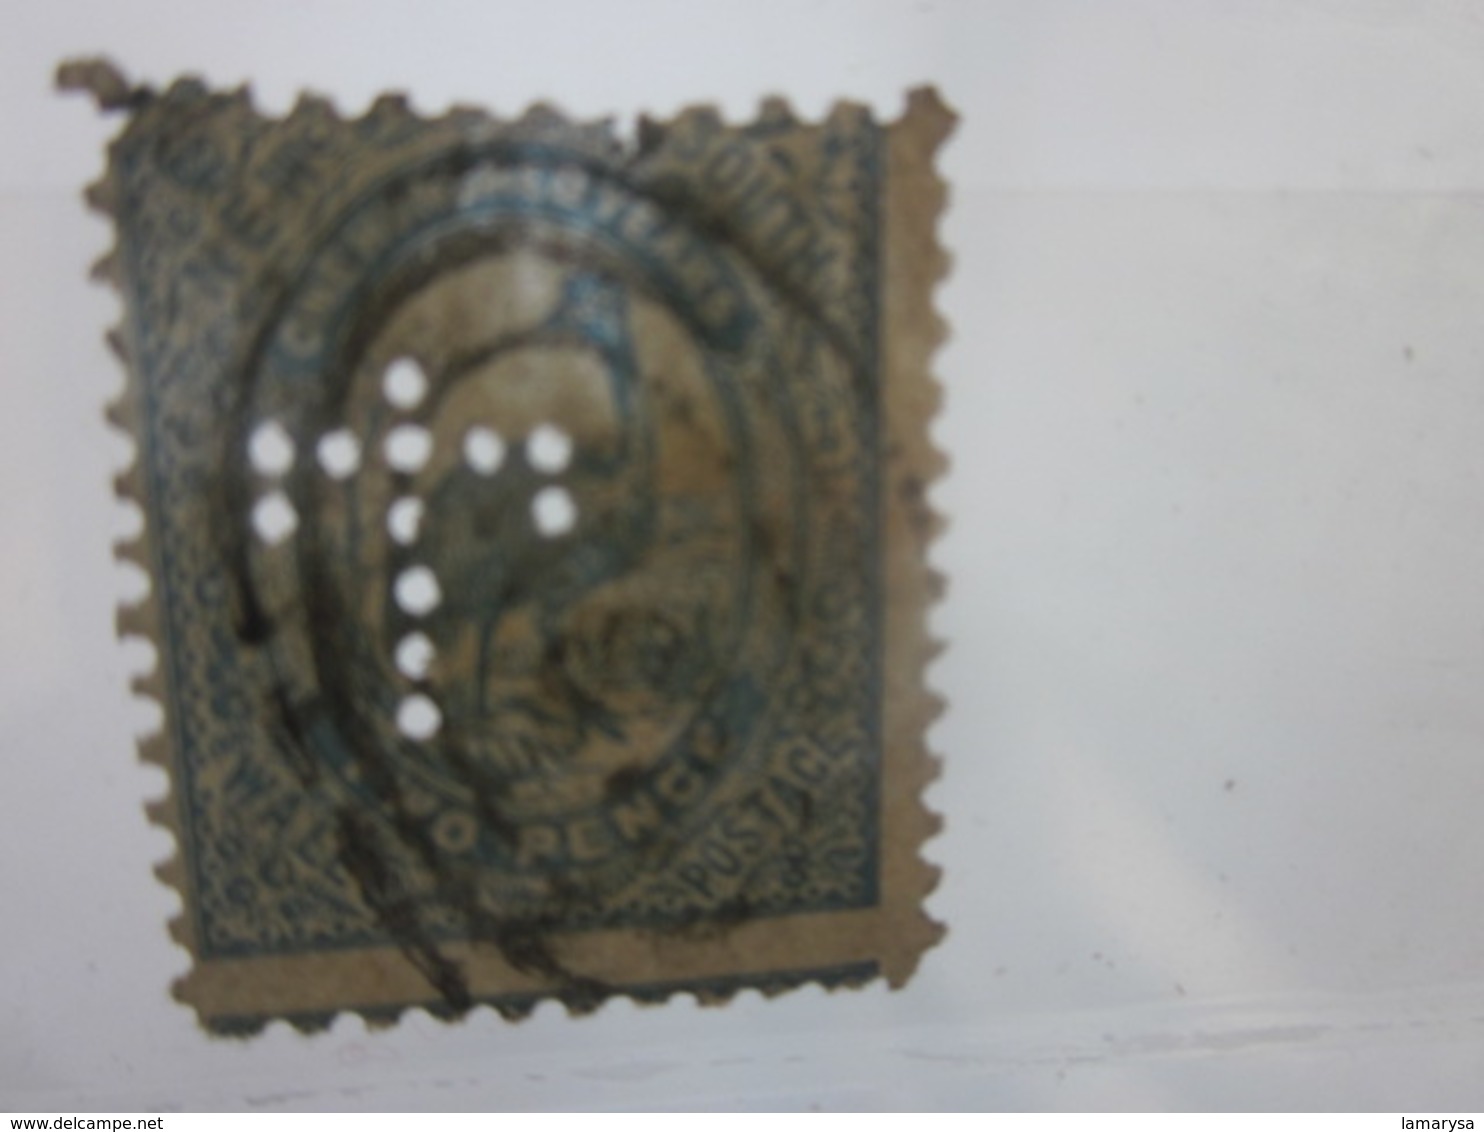 Stamp Timbre AUSTRALIE COLONY NEW SOUTH WALES Perforés Perforé Perforés Perfin Perfins Stamps Perforated Perforations - Perforiert/Gezähnt